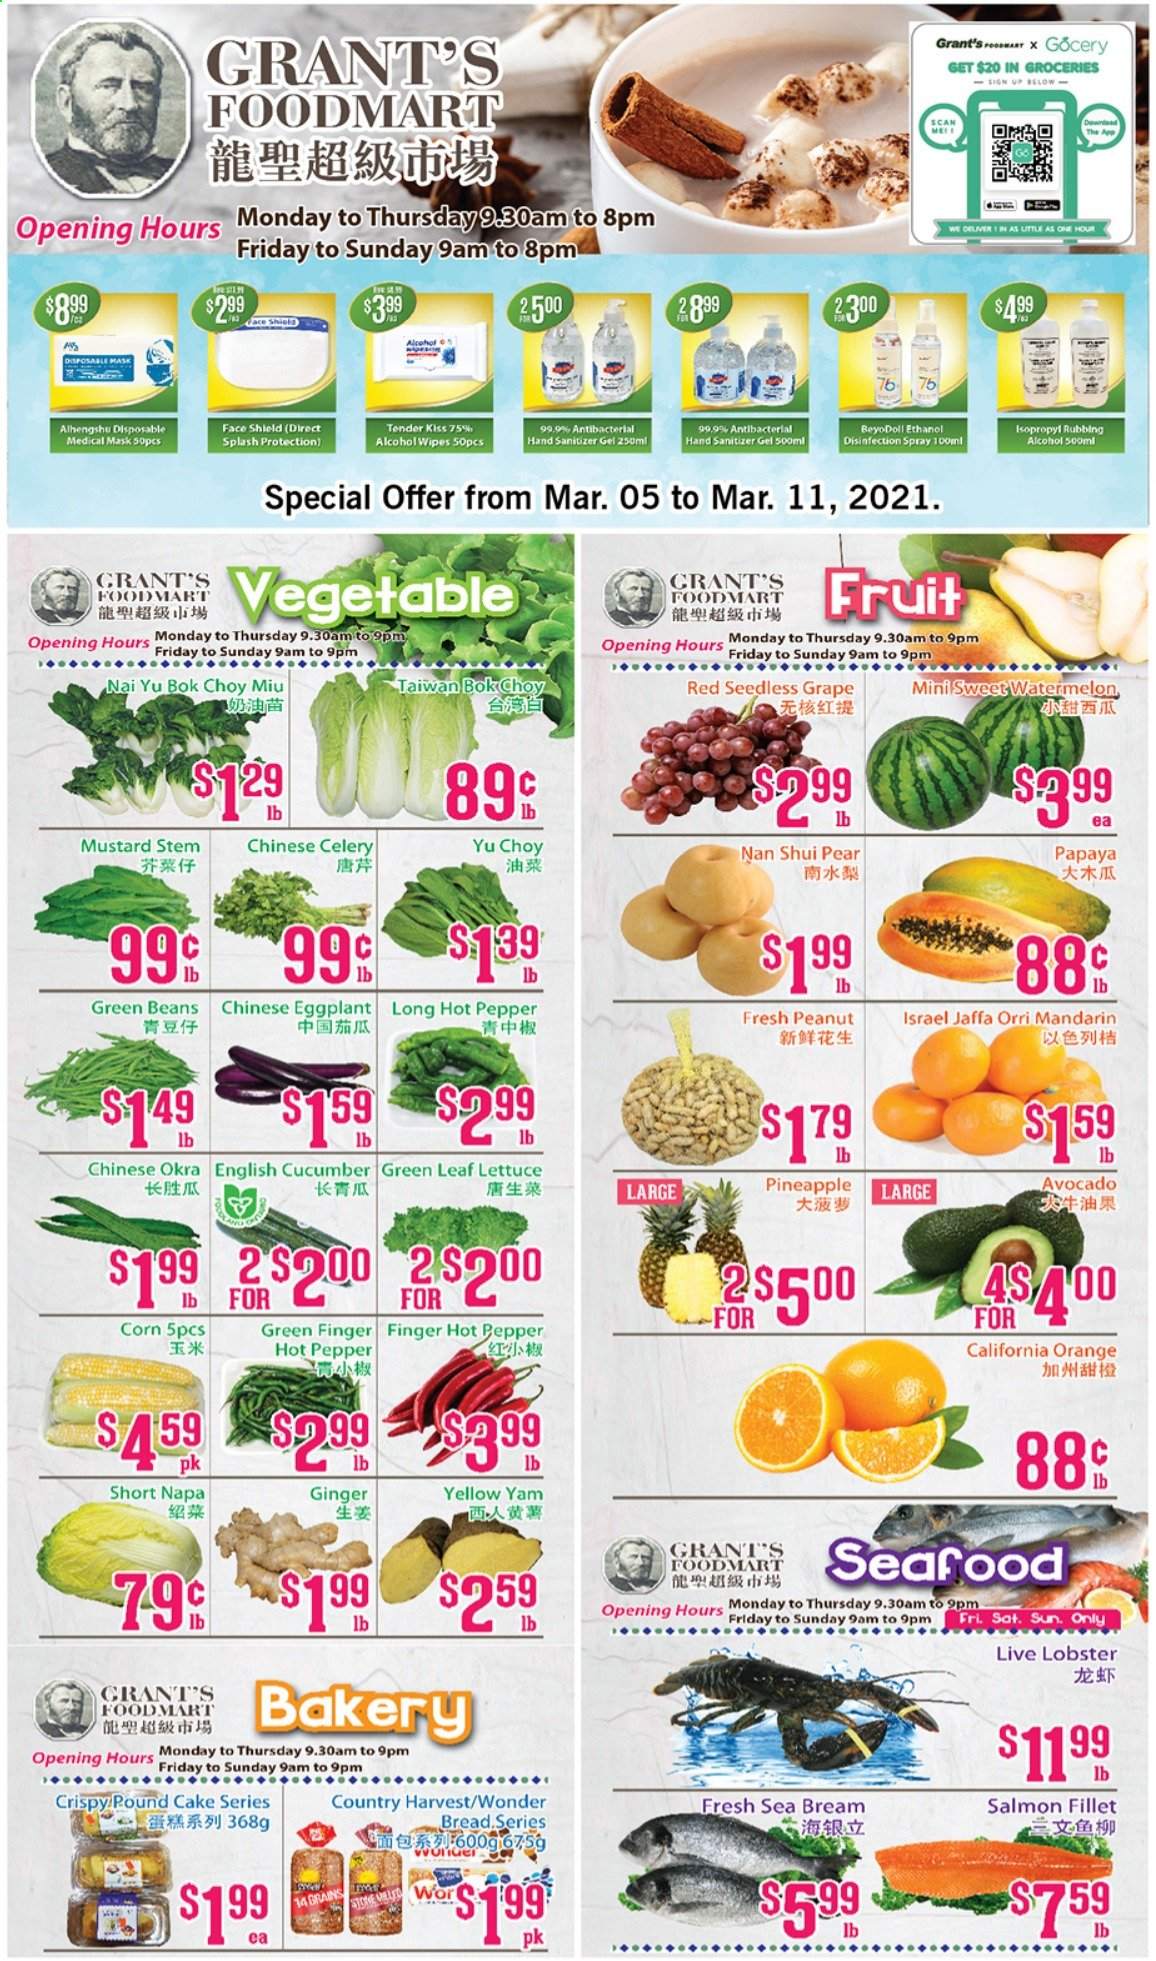 thumbnail - Grant's Foodmart Flyer - March 05, 2021 - March 11, 2021 - Sales products - bread, cake, pound cake, beans, bok choy, celery, corn, ginger, green beans, okra, lettuce, eggplant, avocado, mandarines, watermelon, pineapple, pears, lobster, salmon, salmon fillet, seabream, Country Harvest, pepper, mustard, Grant's, wipes, hand sanitizer, disposable mask. Page 1.